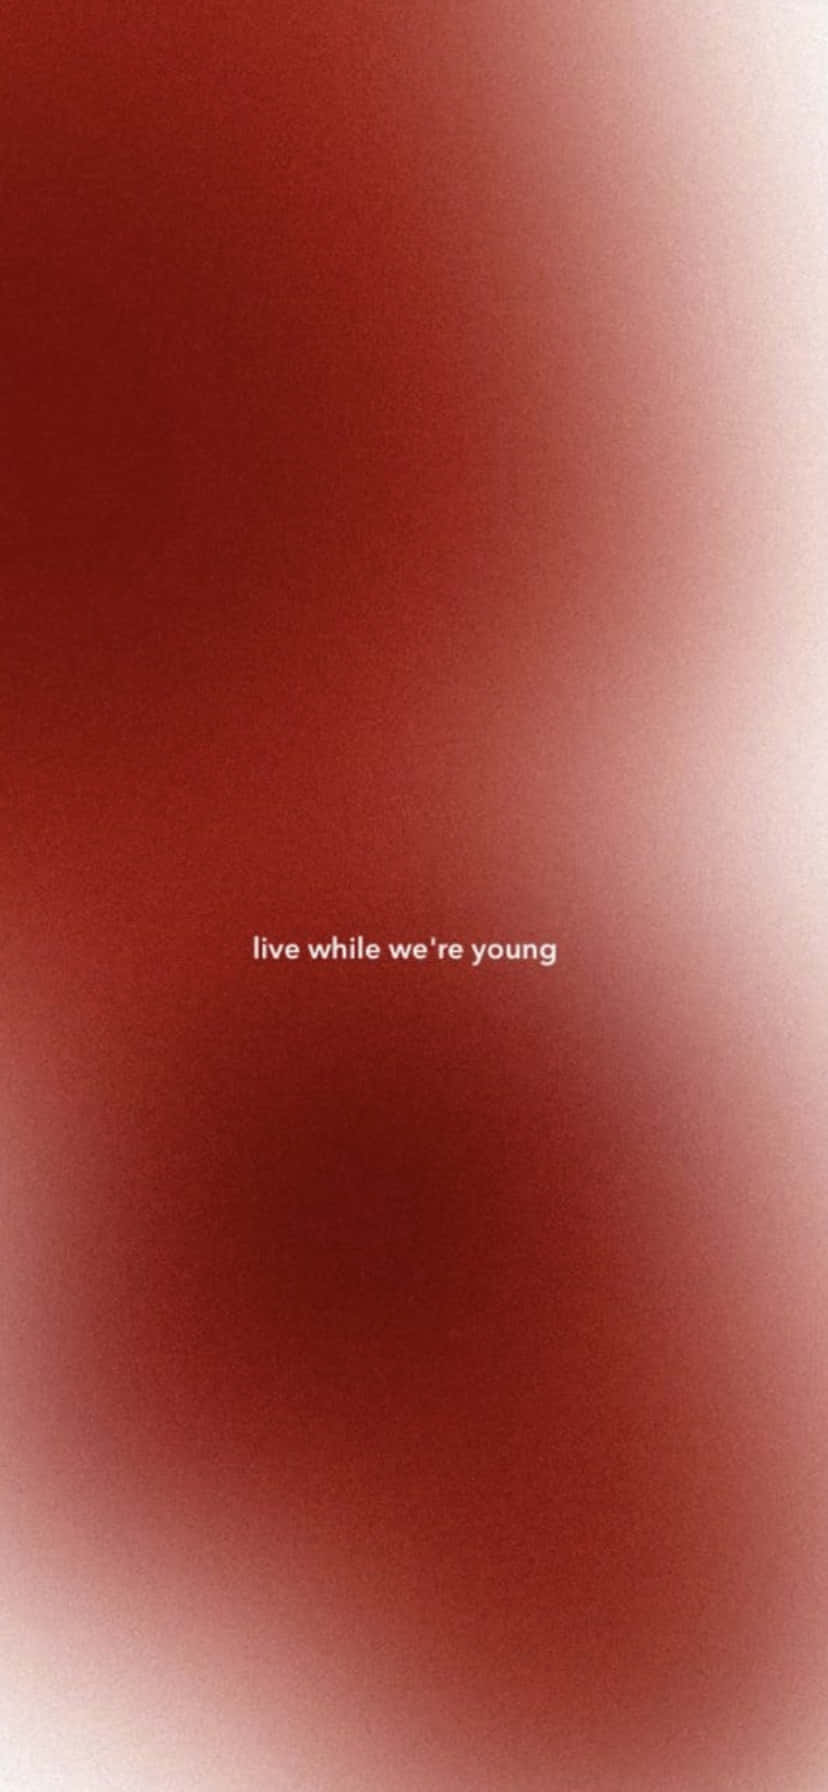 Live While We're Young Aesthetic Red Background